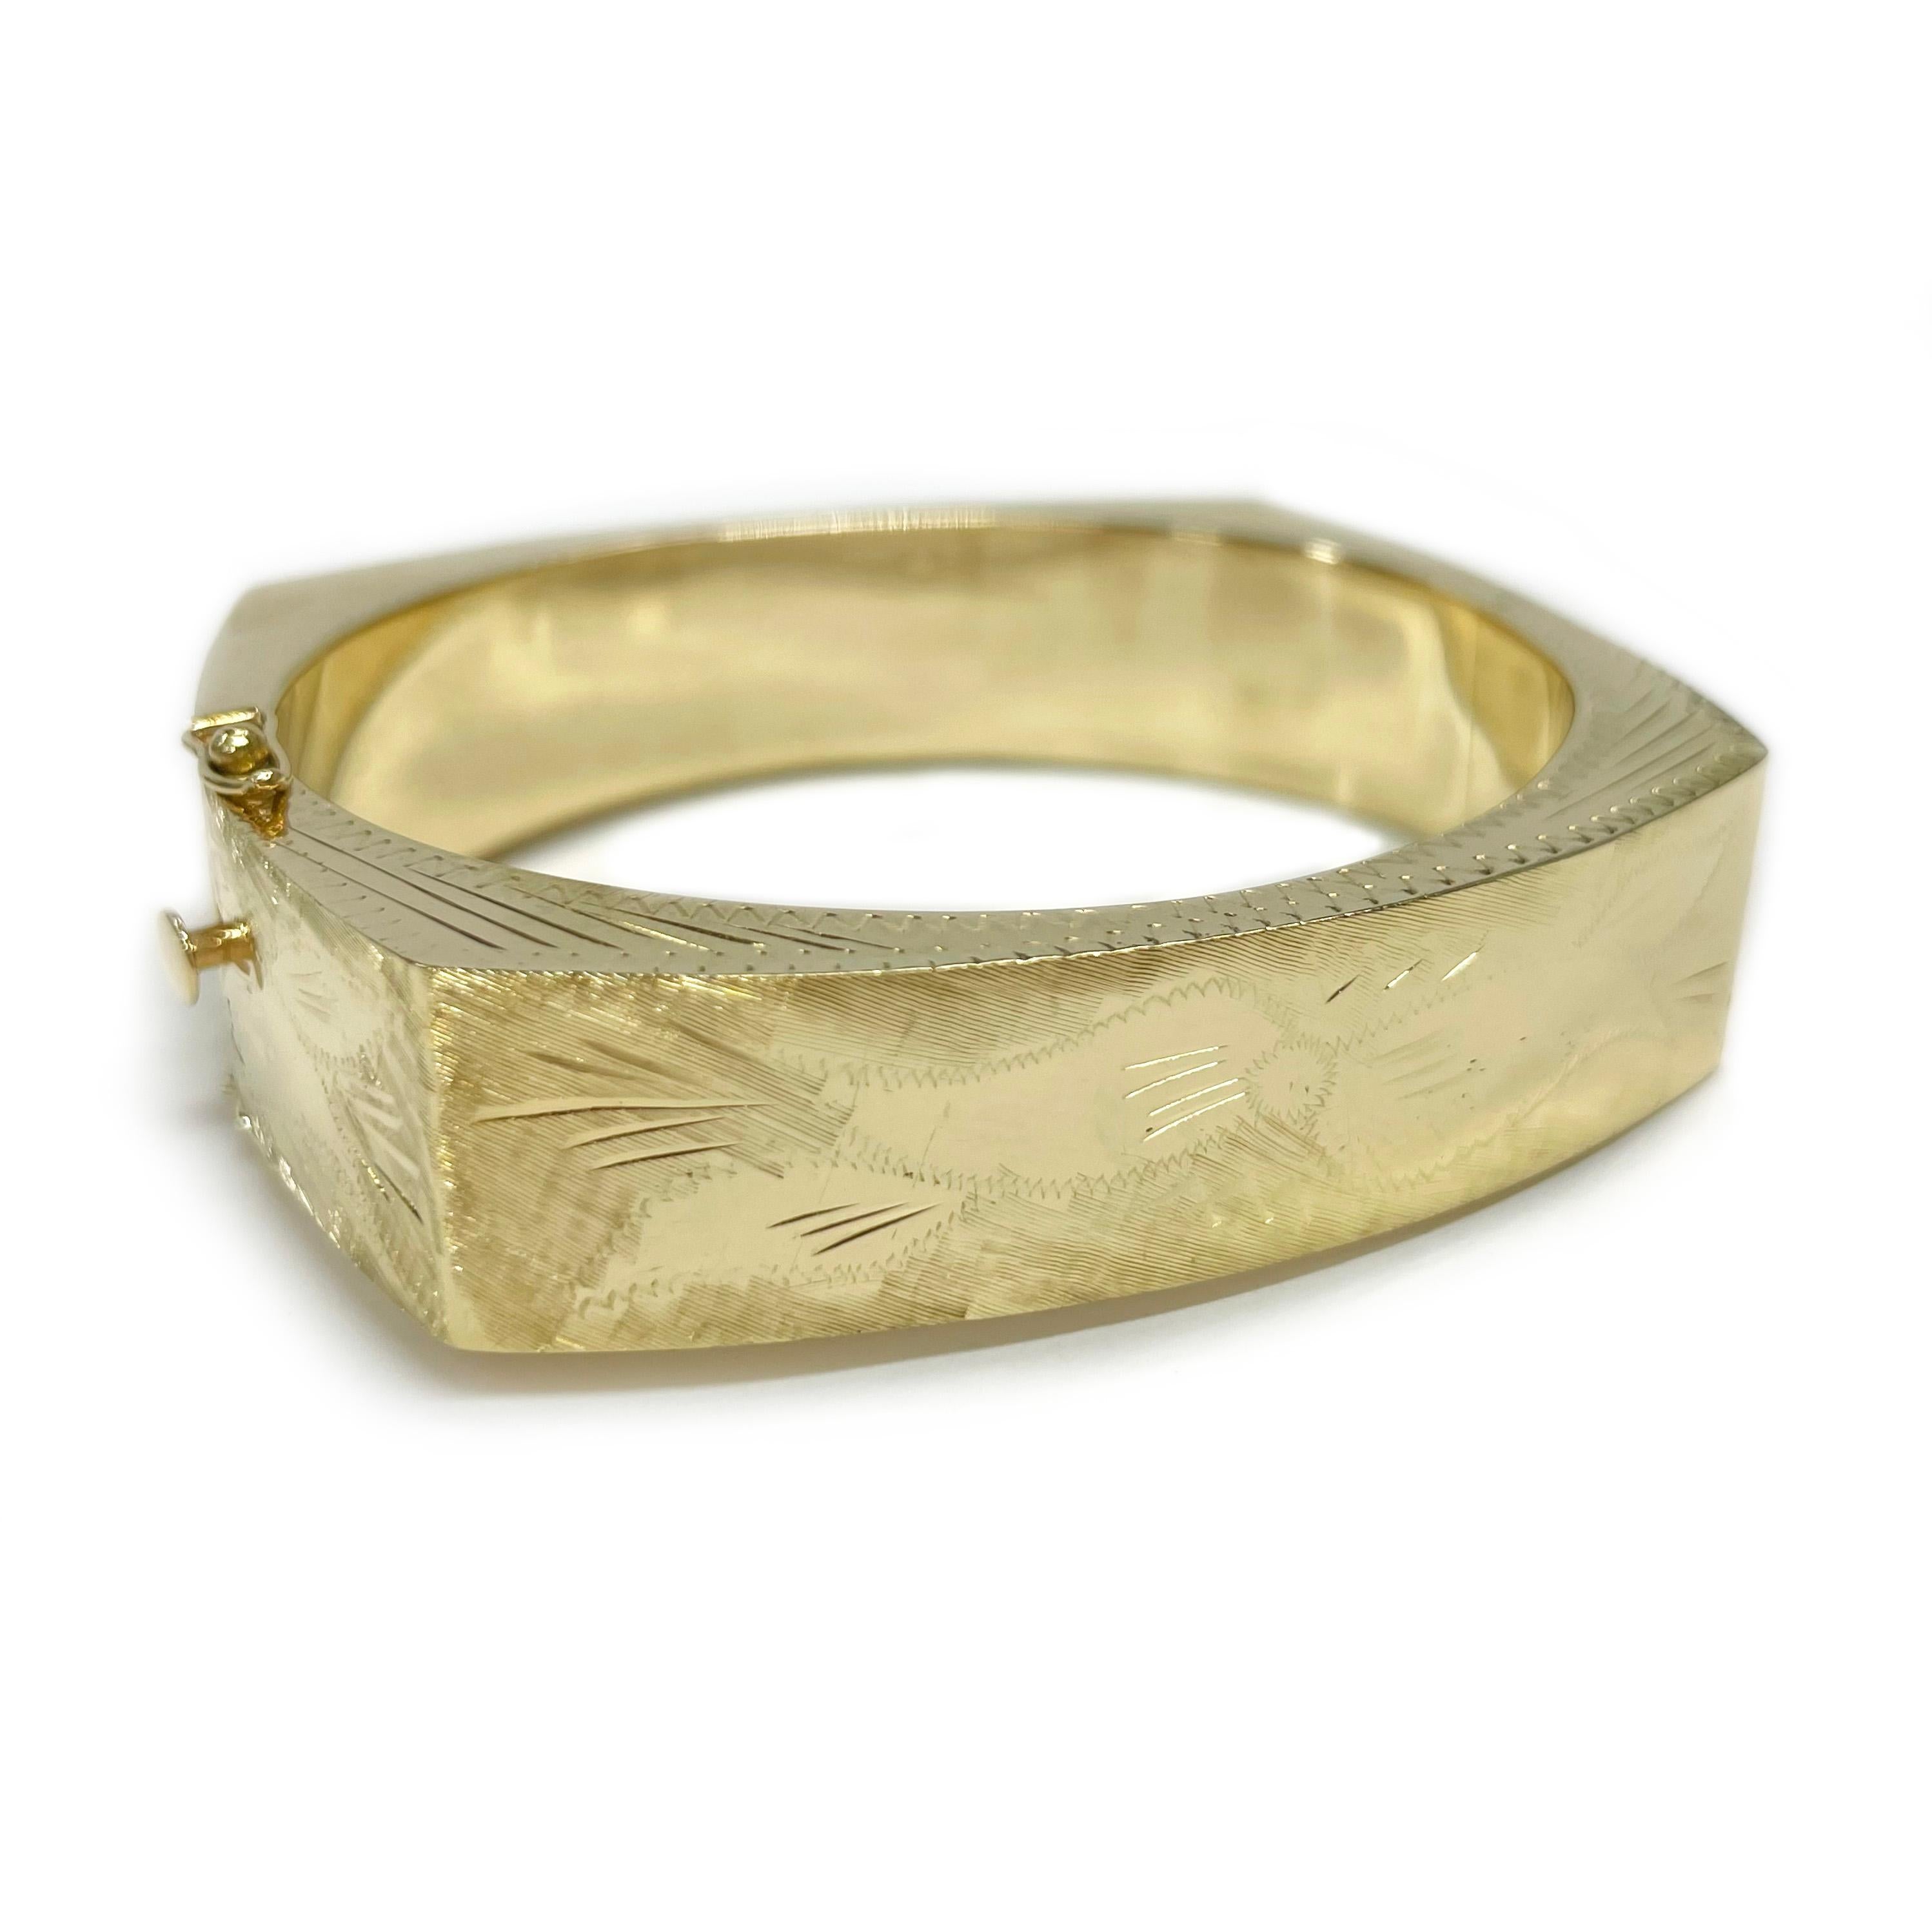 14 Karat Yellow Gold Engraved Diamond-Cut Bangle Bracelet. The hollow bracelet features diamond-cut accents with a hand engraved bow, leaf, and zig-zag designs. The inside of the bangle has a smooth shiny finish while the outside has hand engraving